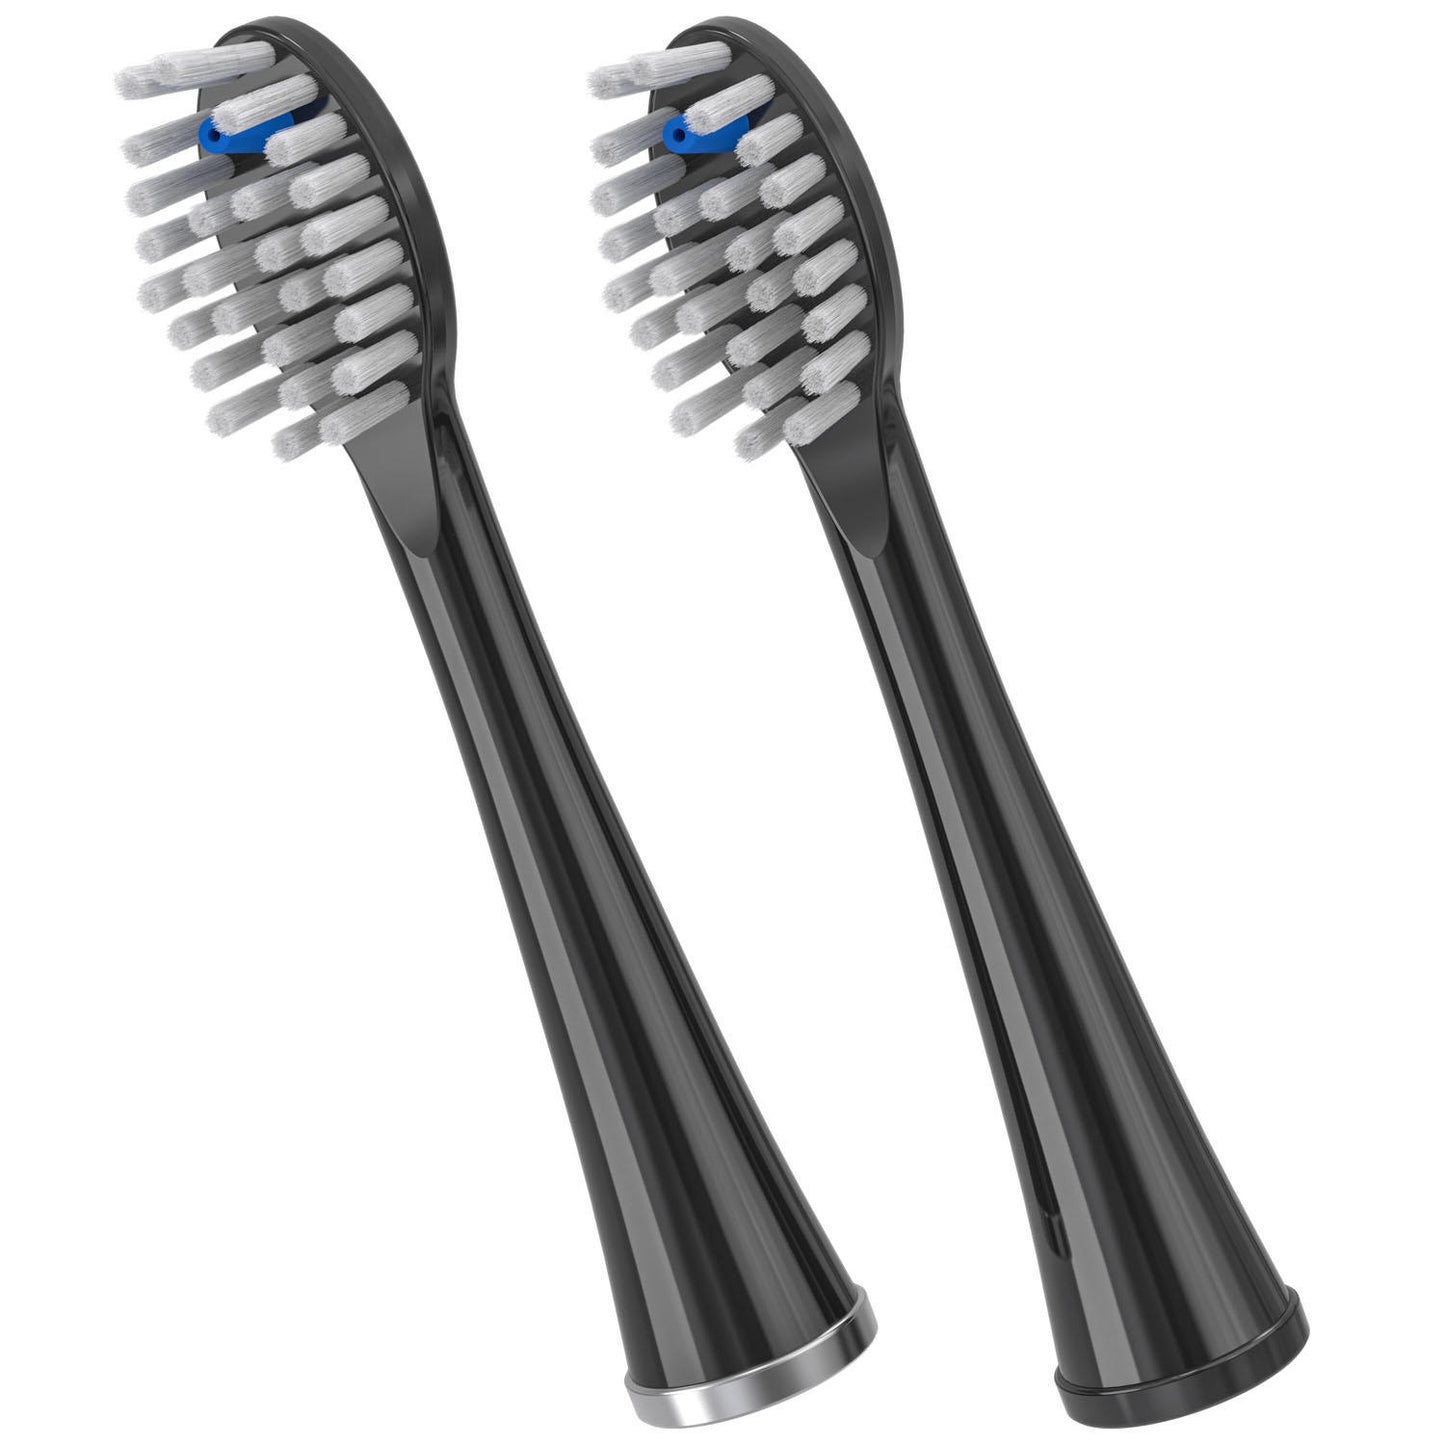 Waterpik Sonic-Fusion Full-Size Replacement Flossing Toothbrush Heads,Black (6 pk)